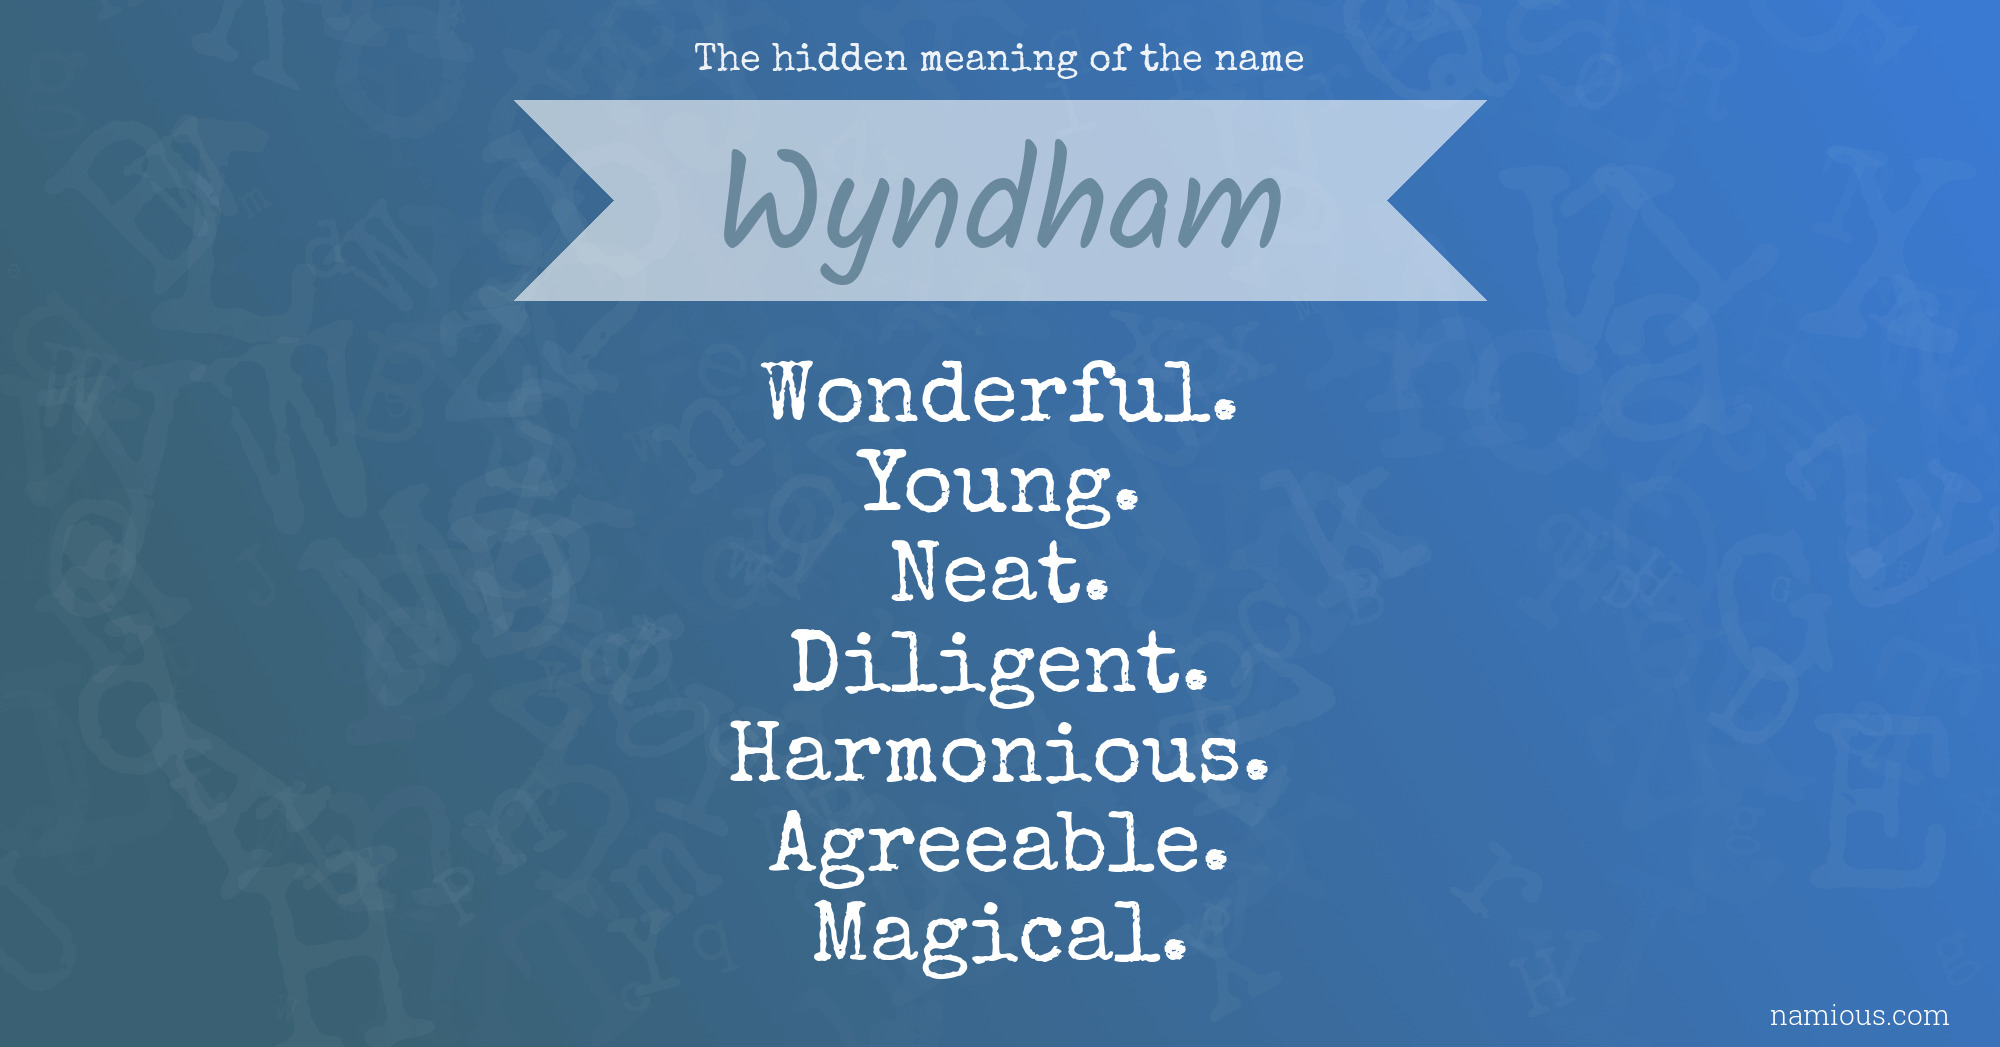 The hidden meaning of the name Wyndham